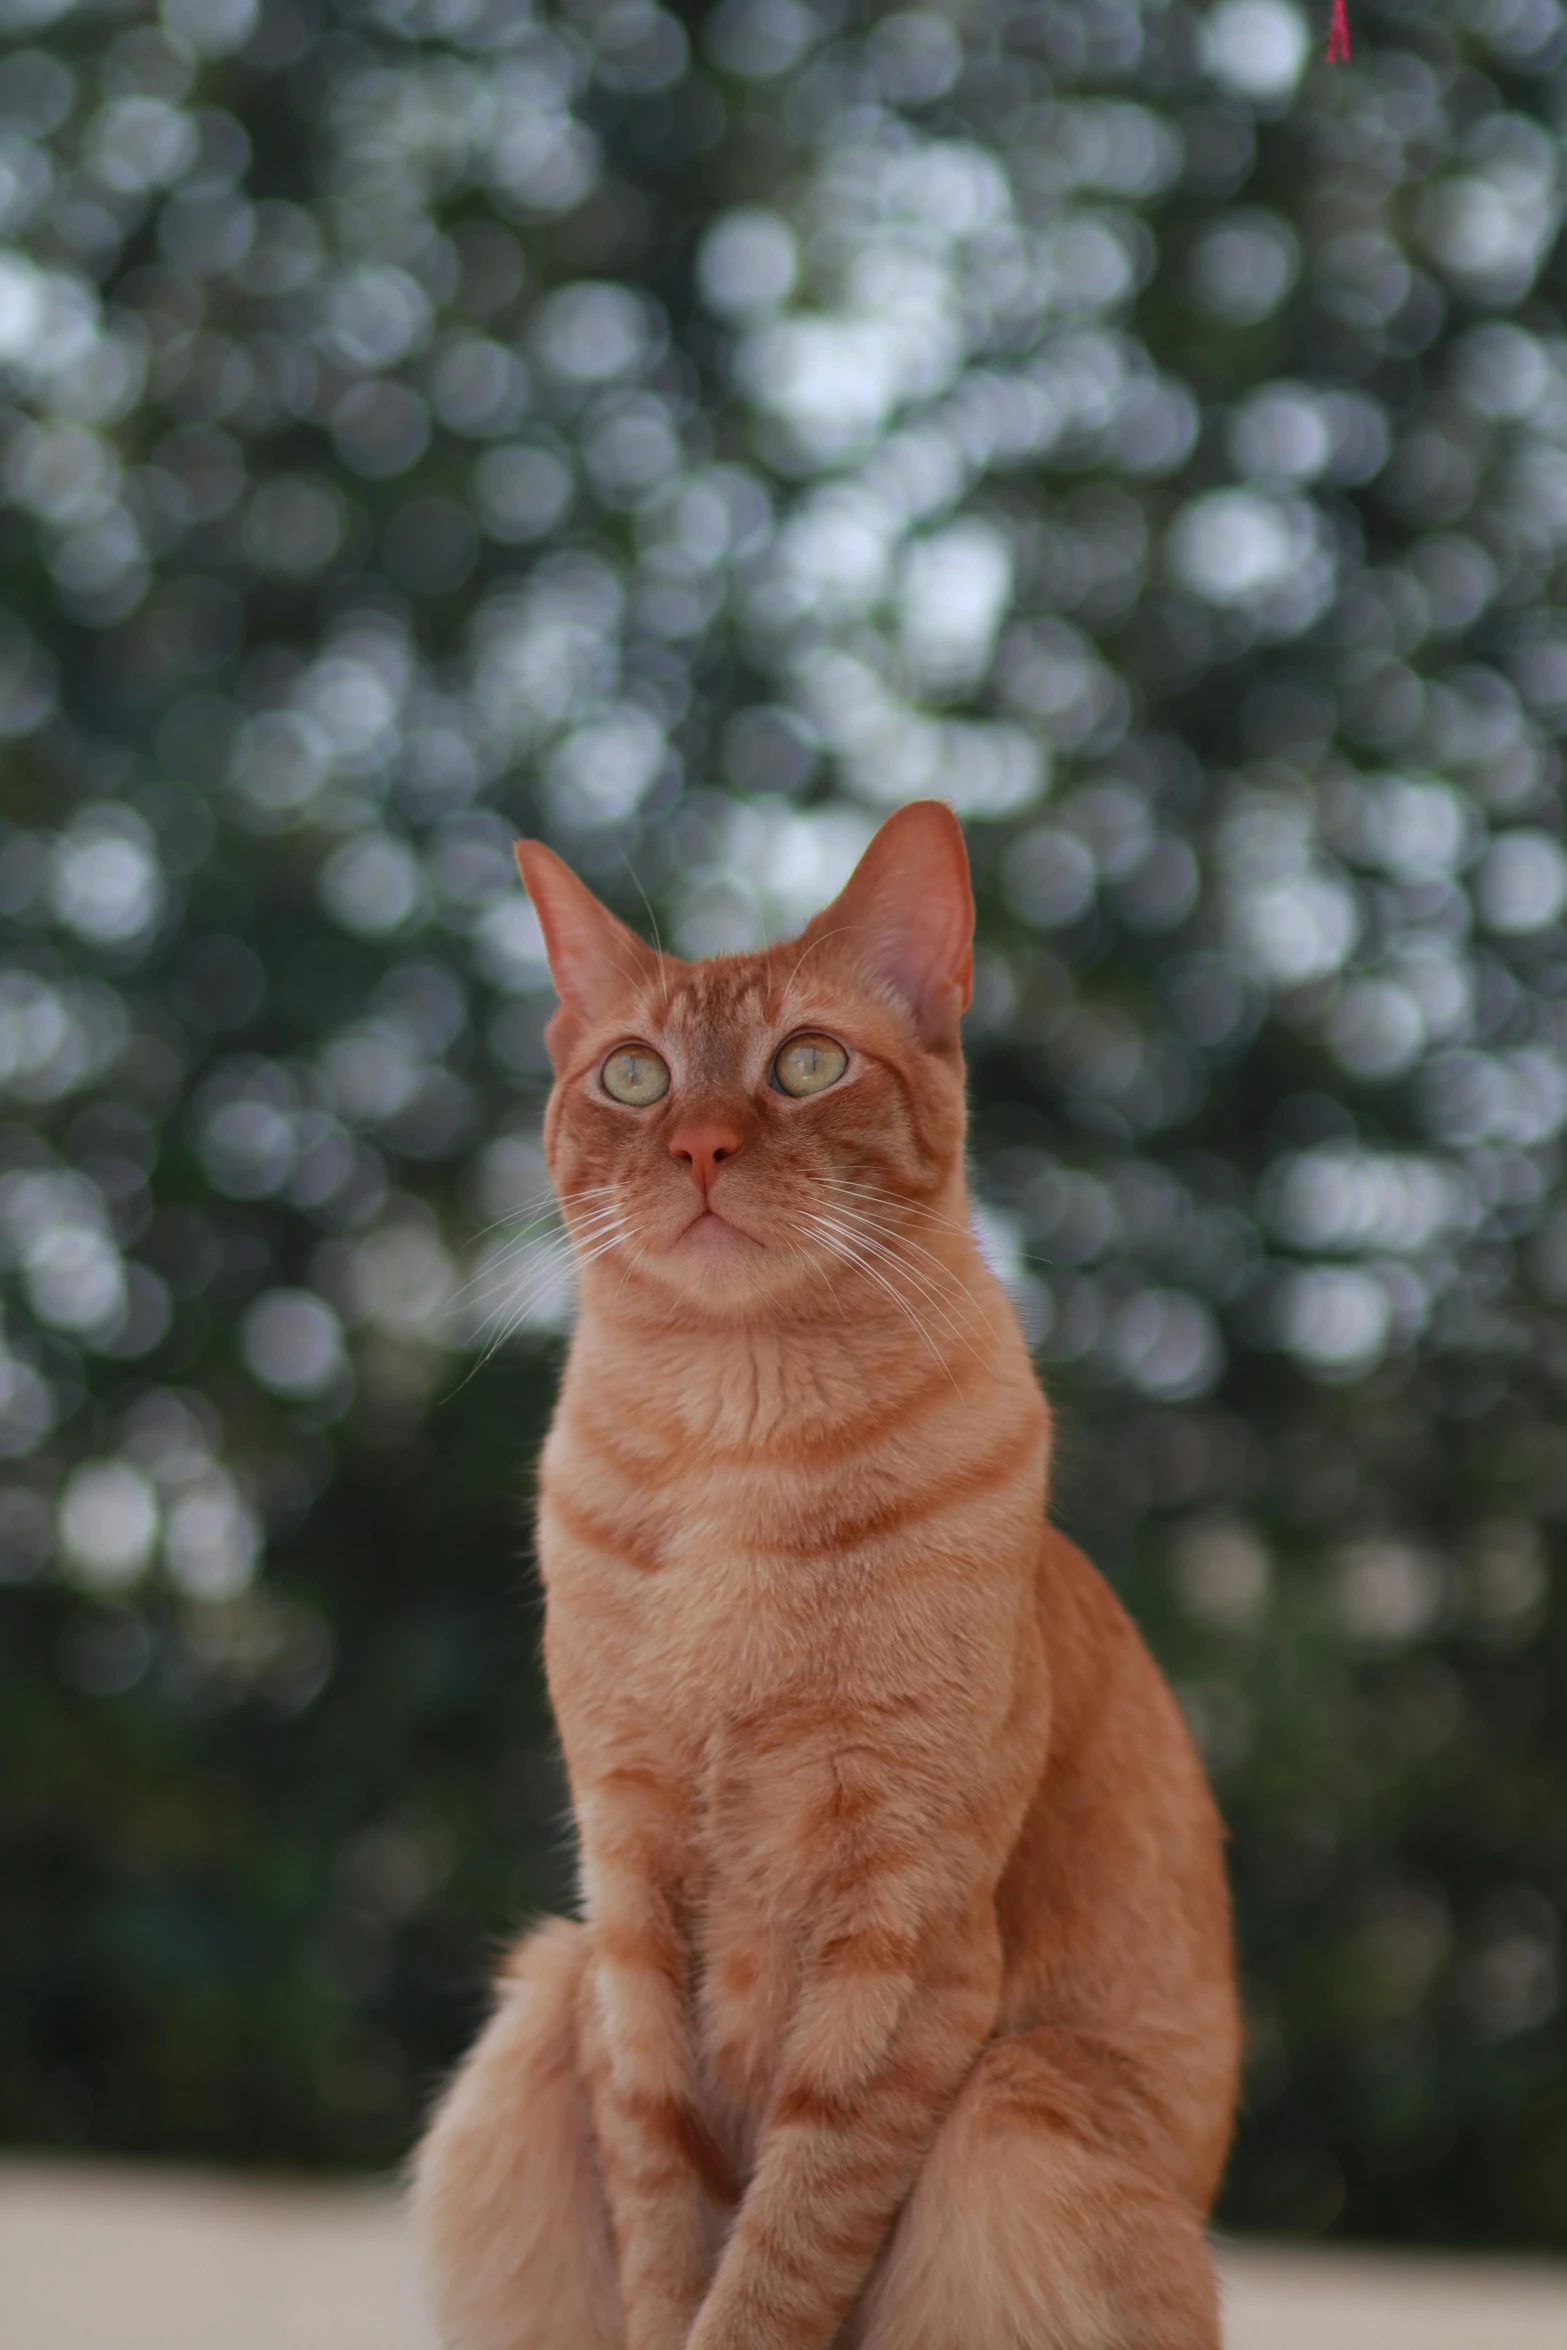 the orange cat is looking upward at soing